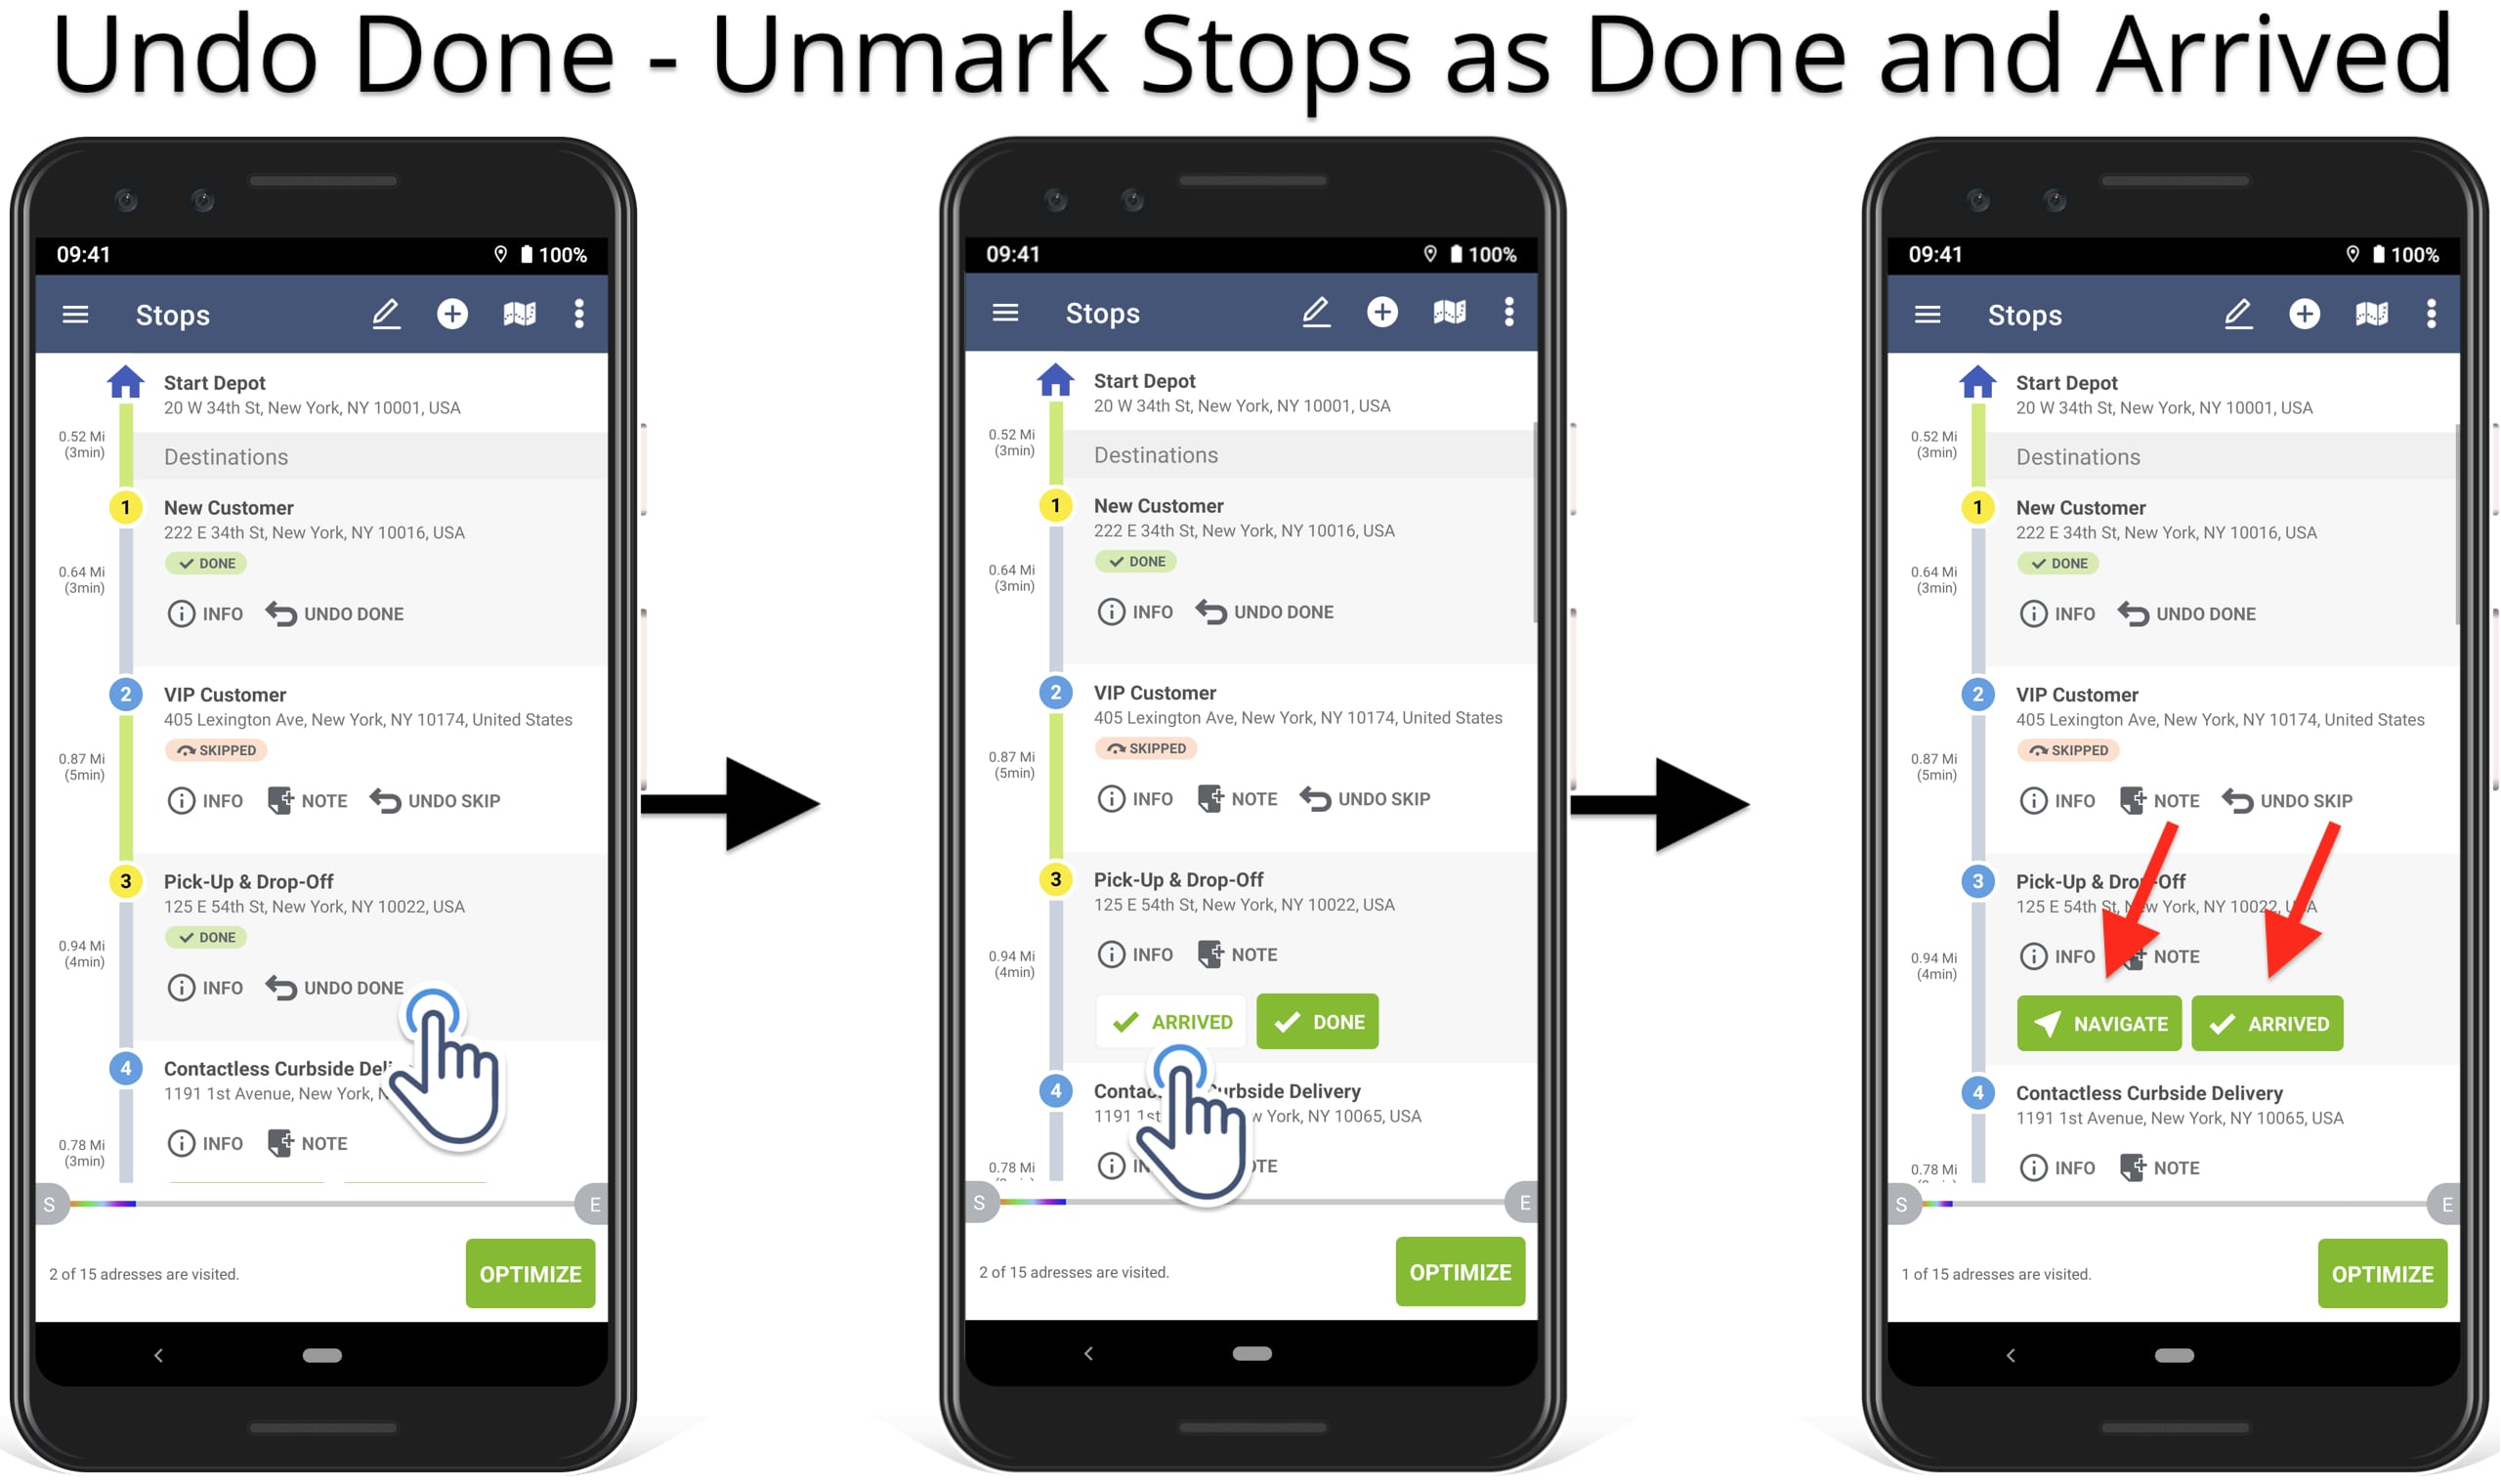 Undo Arrived and Done route stops on the Android route planner app.